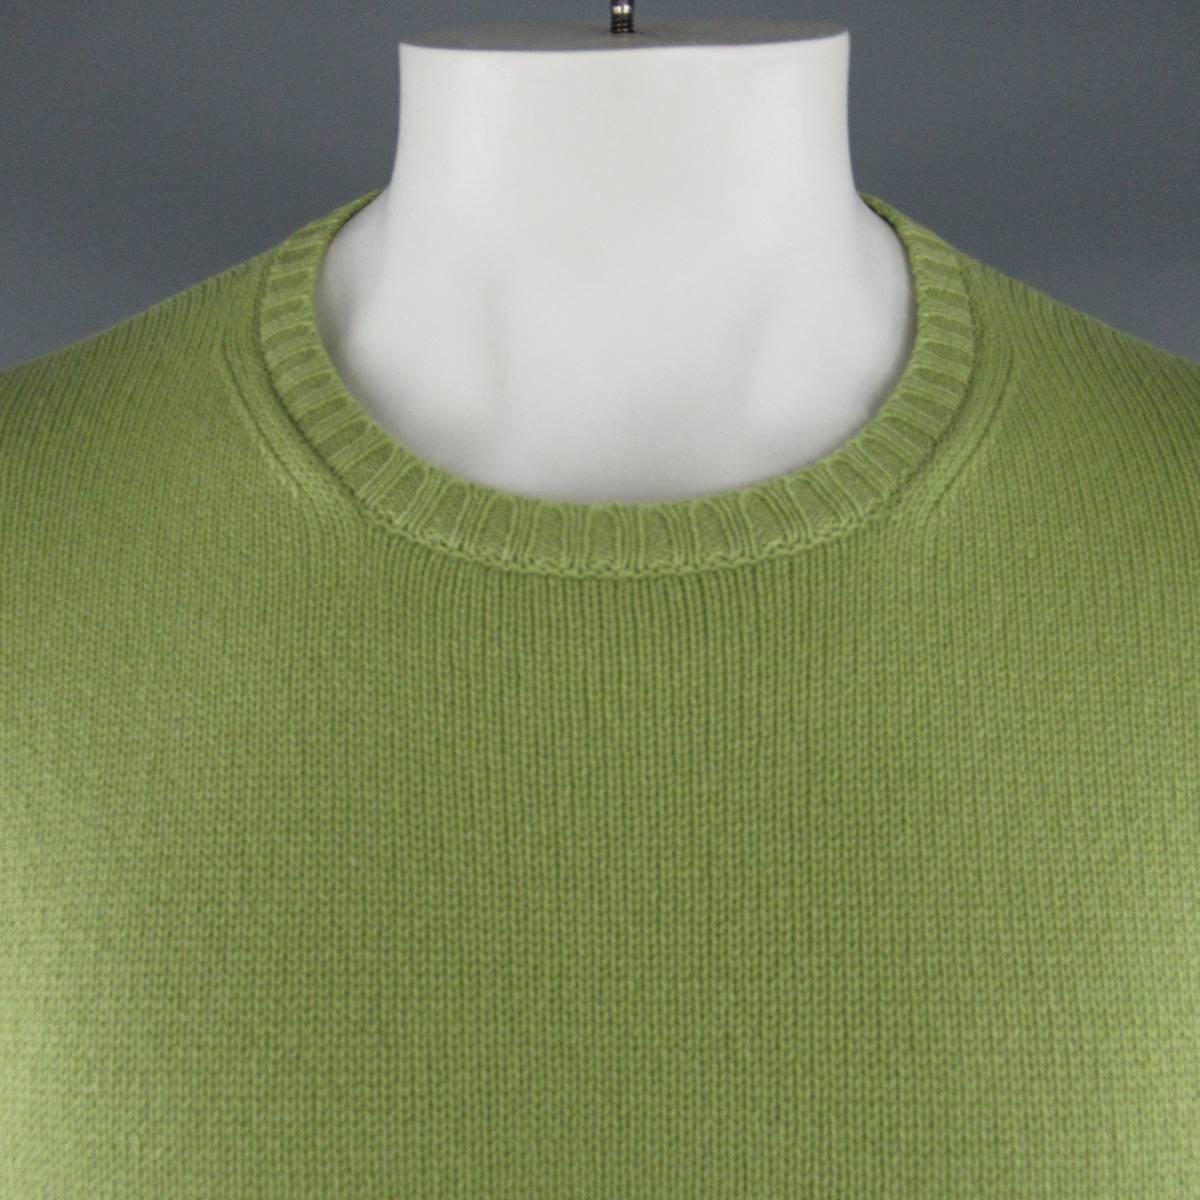 Classic LORO PIANA crewneck sweater comes in a light green cashmere knit with ribbed waistband. Made in Italy.
 
Good Pre-Owned Condition.
Marked: IT 50
 
Measurements:
 
Shoulder: 17.5 in.
Chest: 43 in.
Sleeve: 24 in.
Length: 27 in.

SKU: 83486